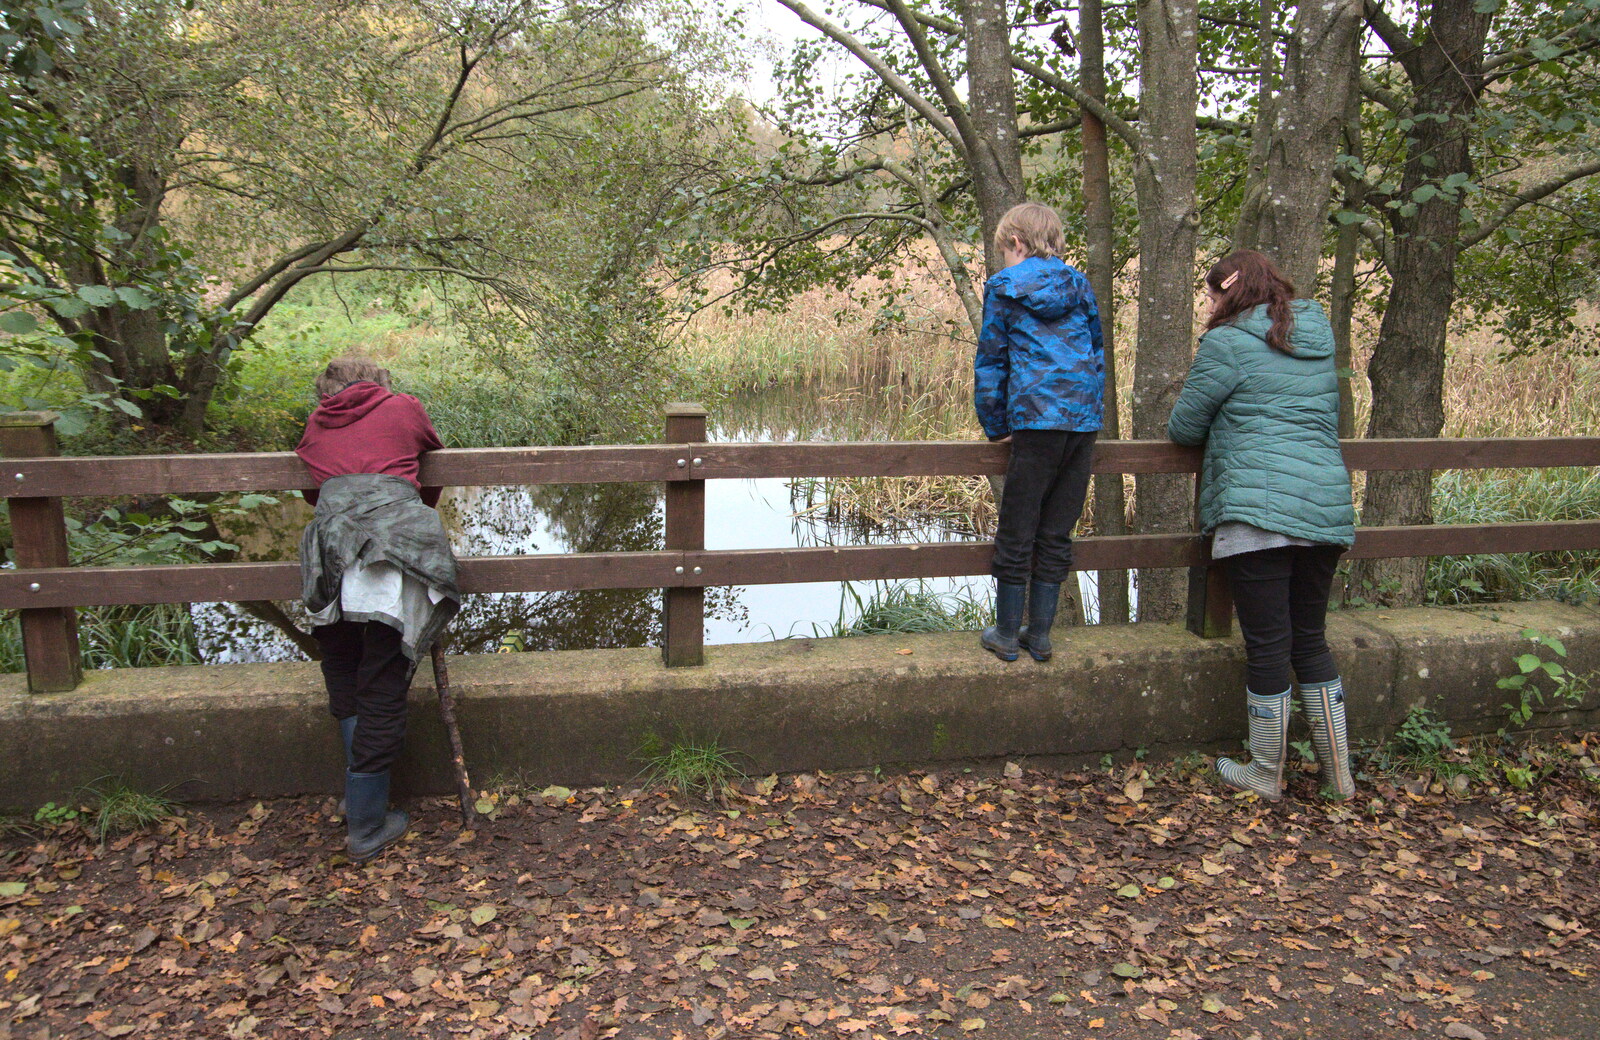 The gang hang on a fence and look over the bridge from A Trip to Lynford Arboretum, Mundford, Norfolk - 30th October 2020